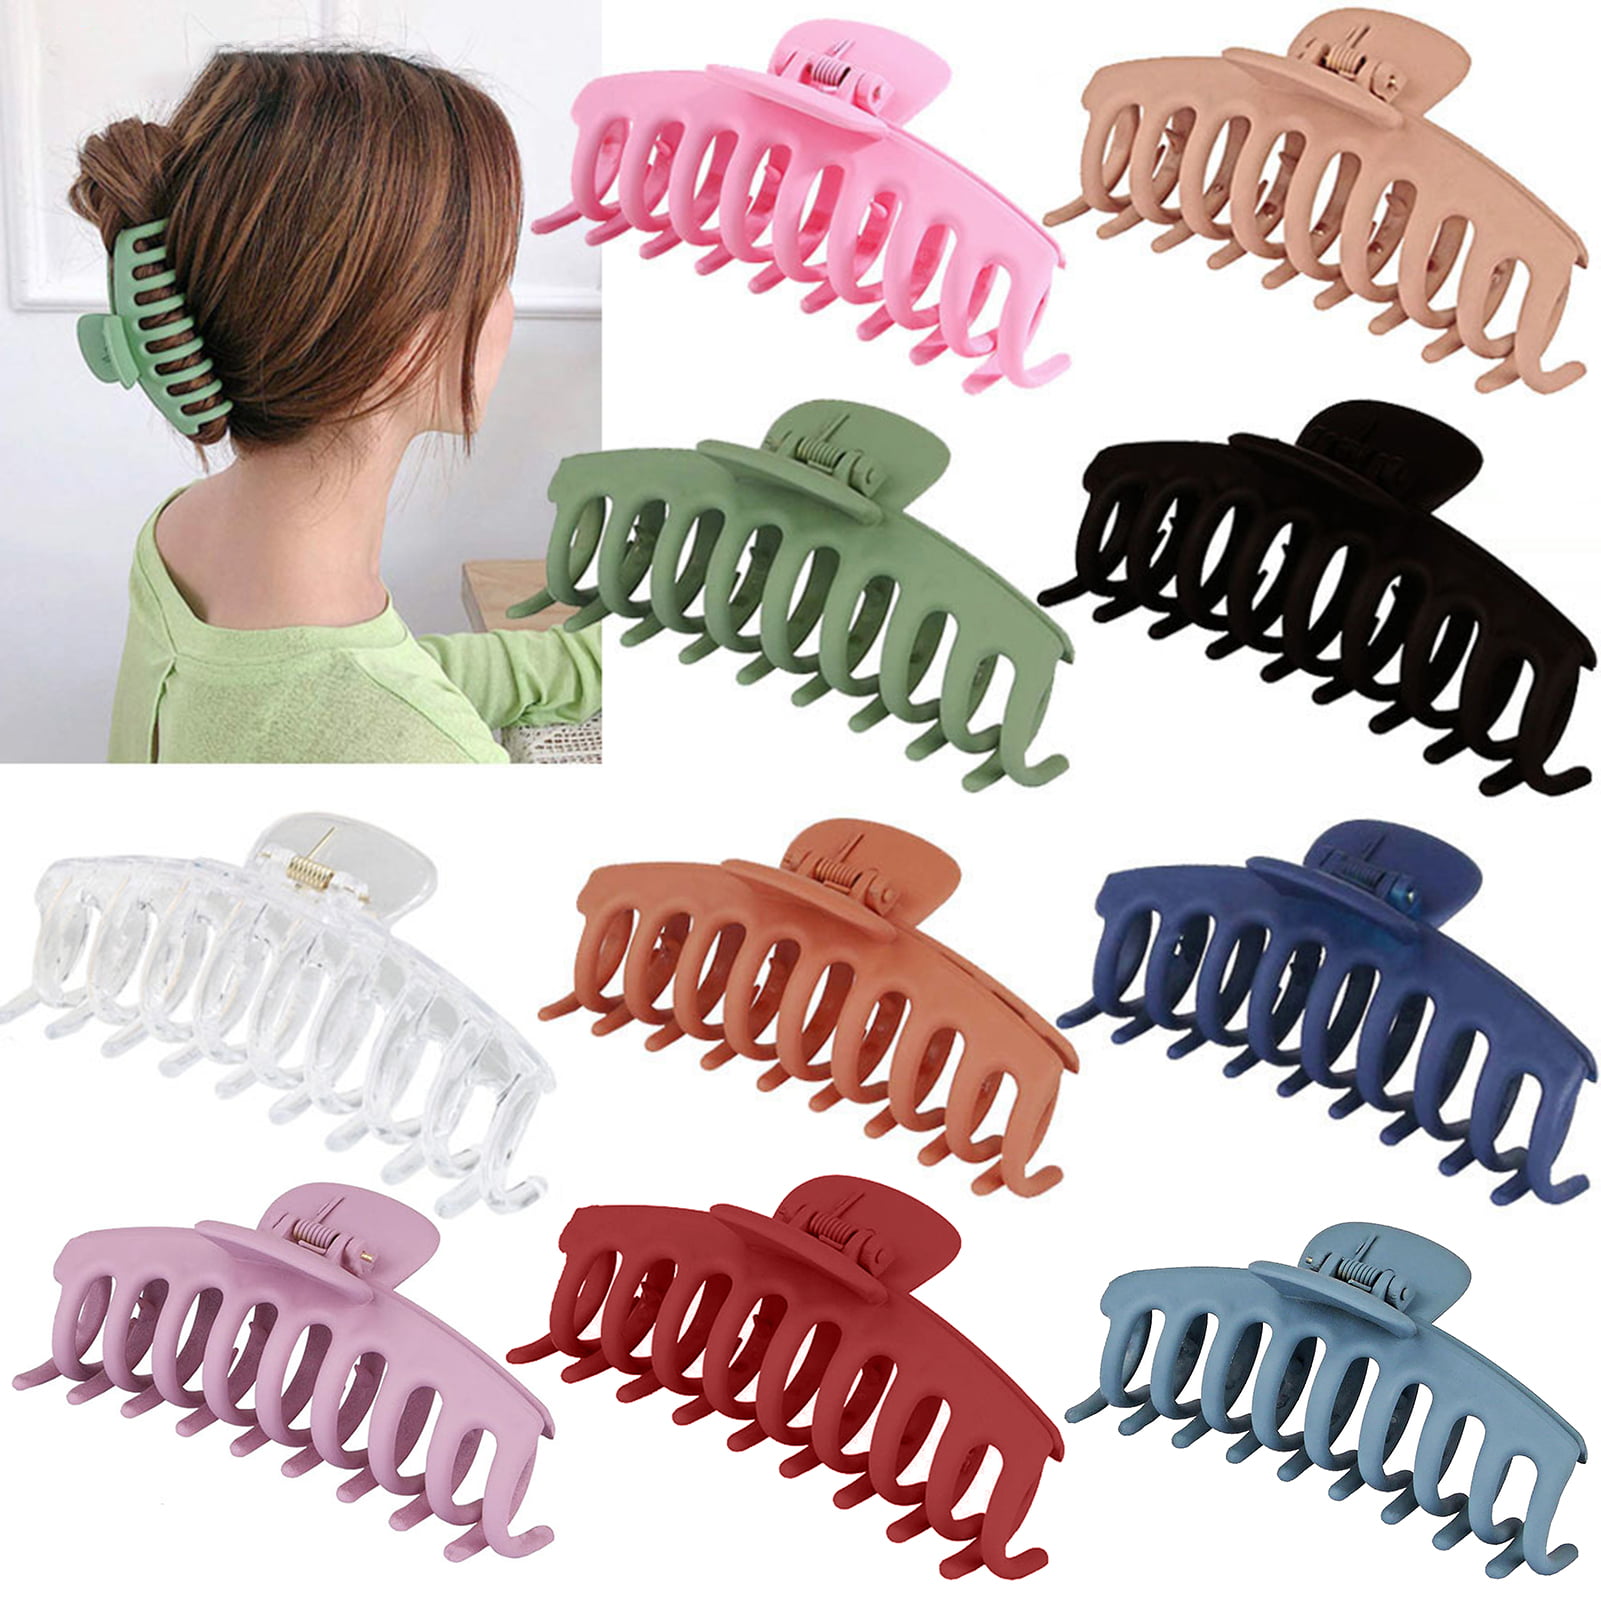 Multicolor Acrylic Hair Claw Crab Clamp Hair Clip Make Up Hair Styling Women Hot 